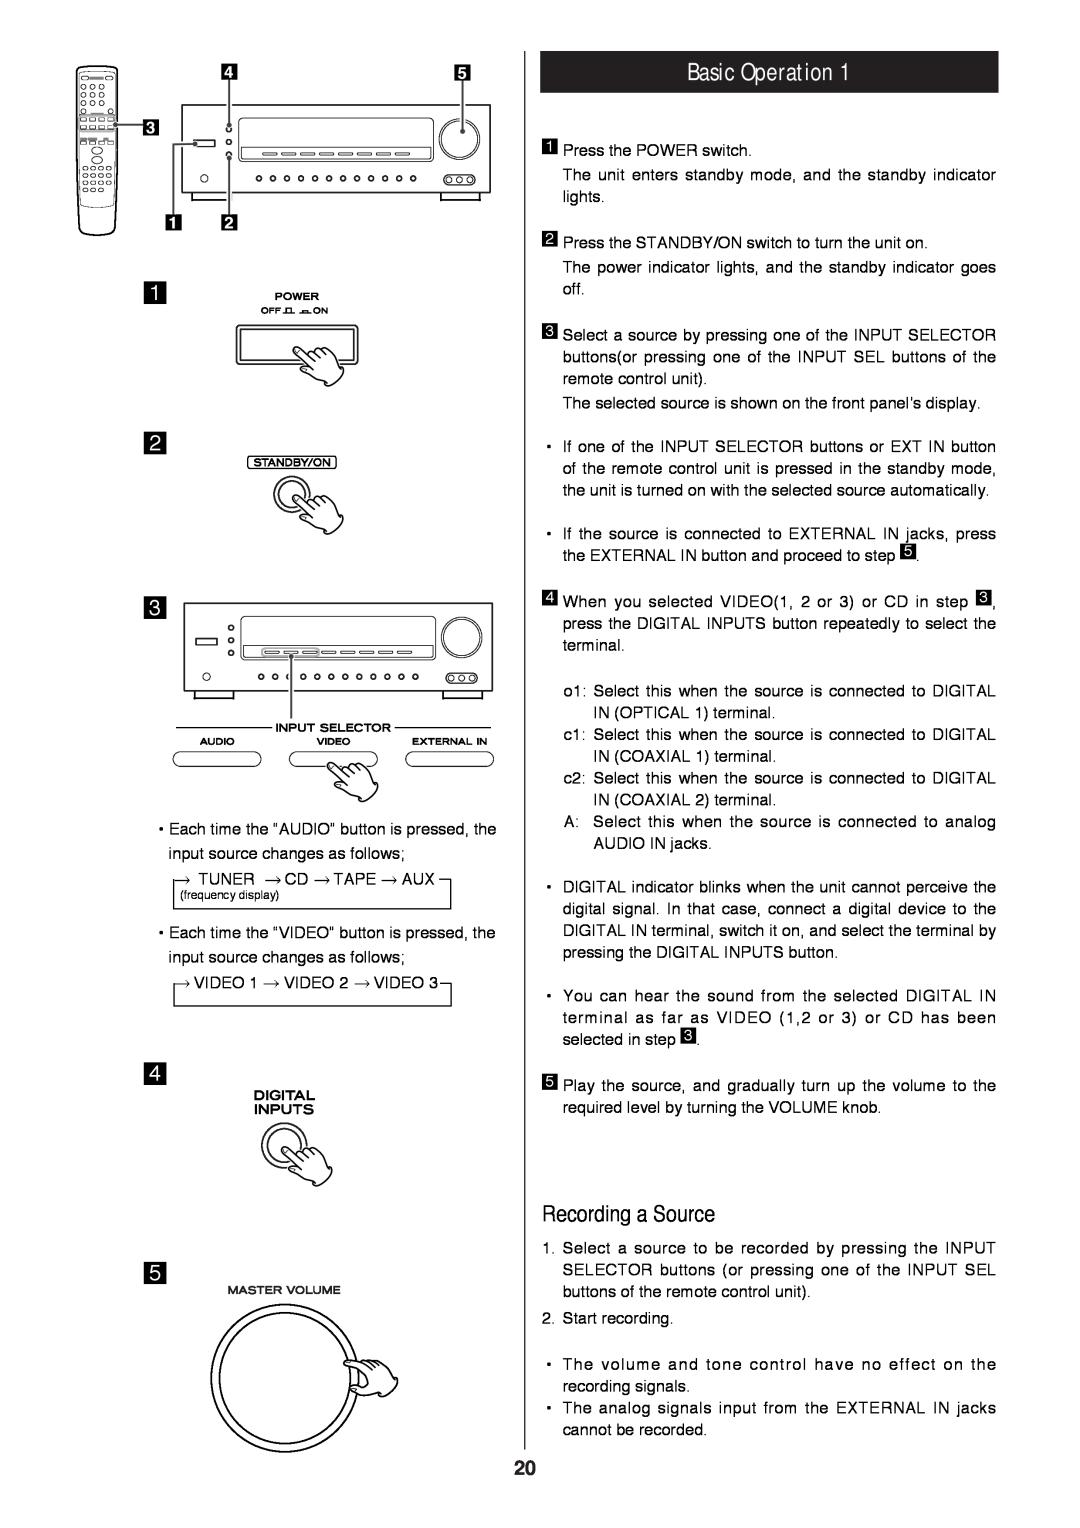 Proson rv2600 dts owner manual Basic Operation, Recording a Source 